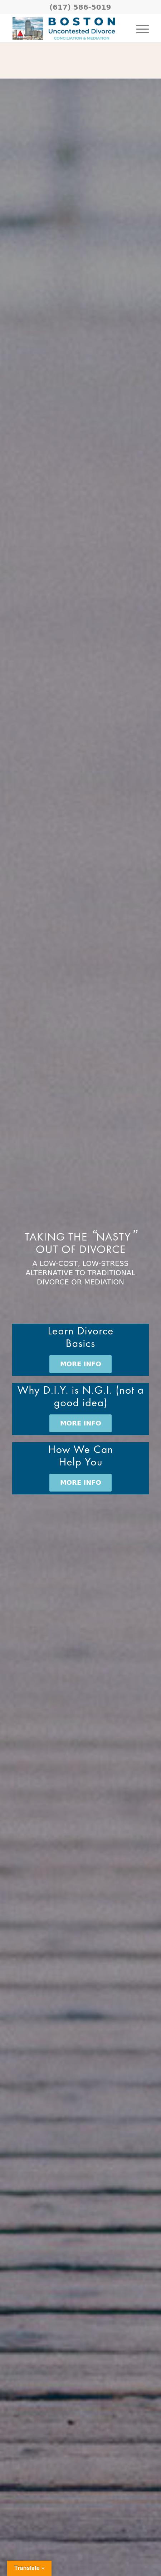 Boston Uncontested Divorce Conciliation and Mediation - Newton MA Lawyers